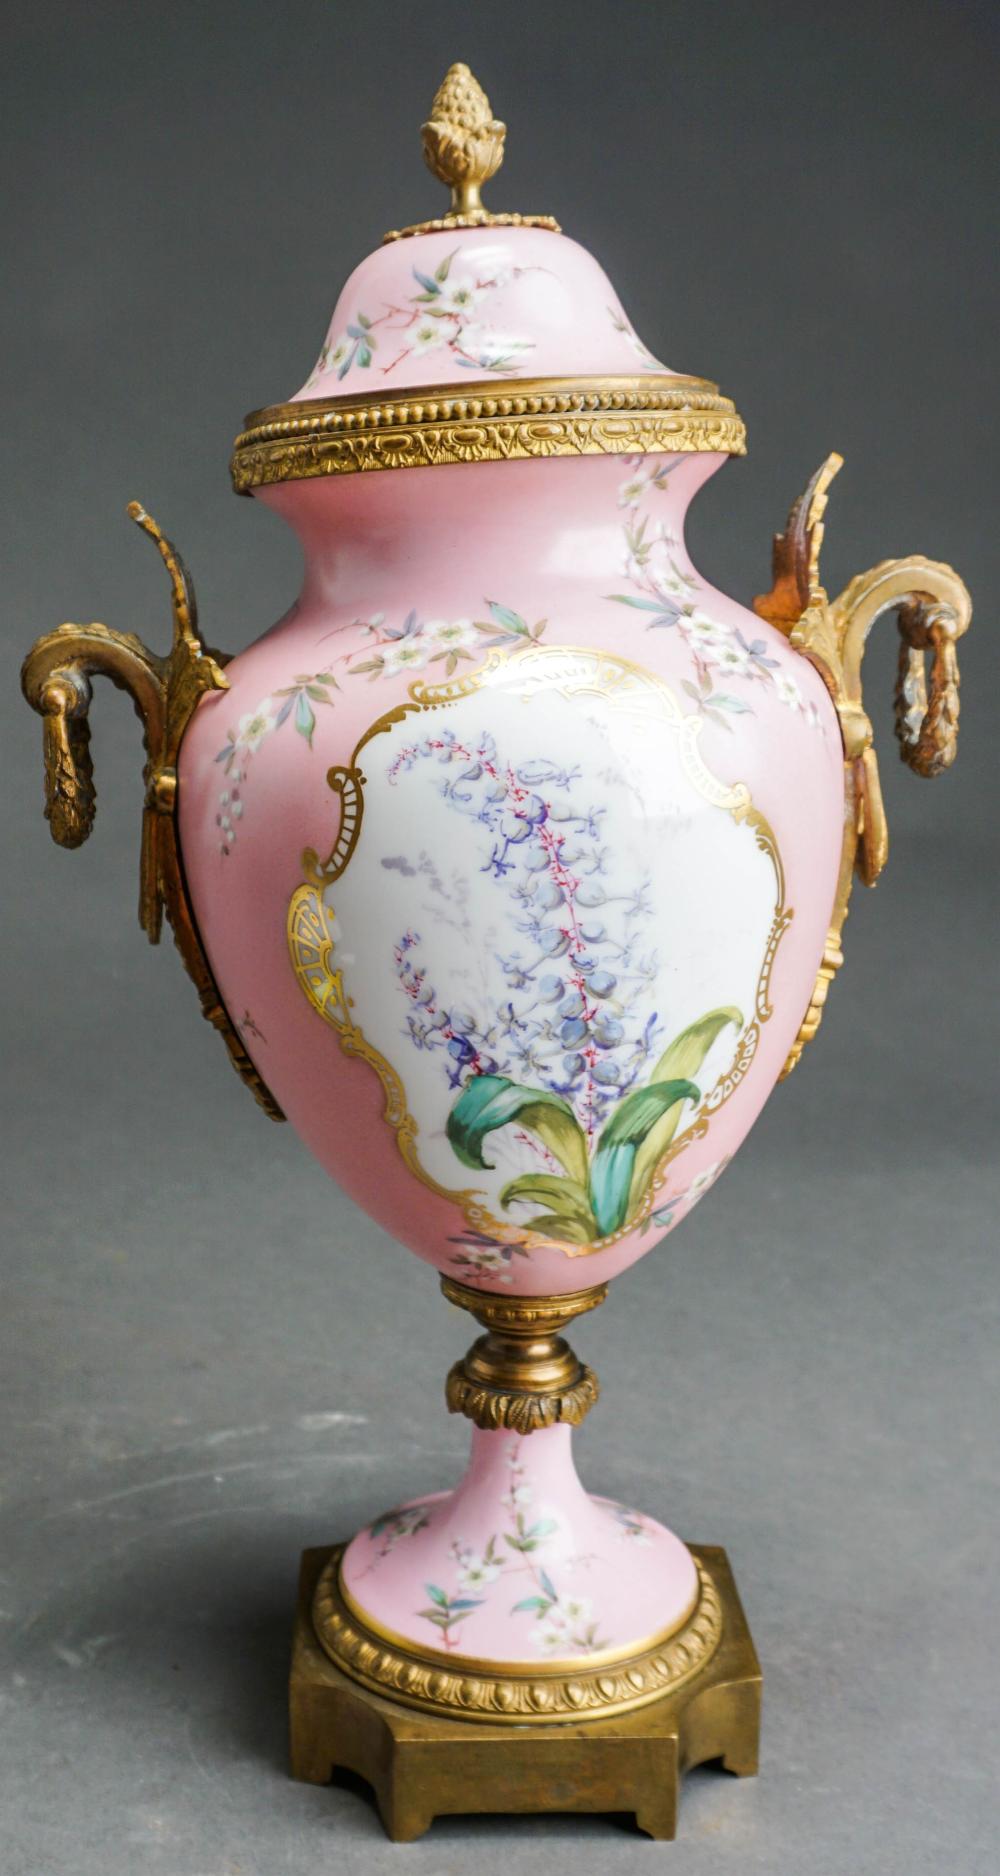 SEVRES TYPE ORMOLU MOUNTED DECORATED